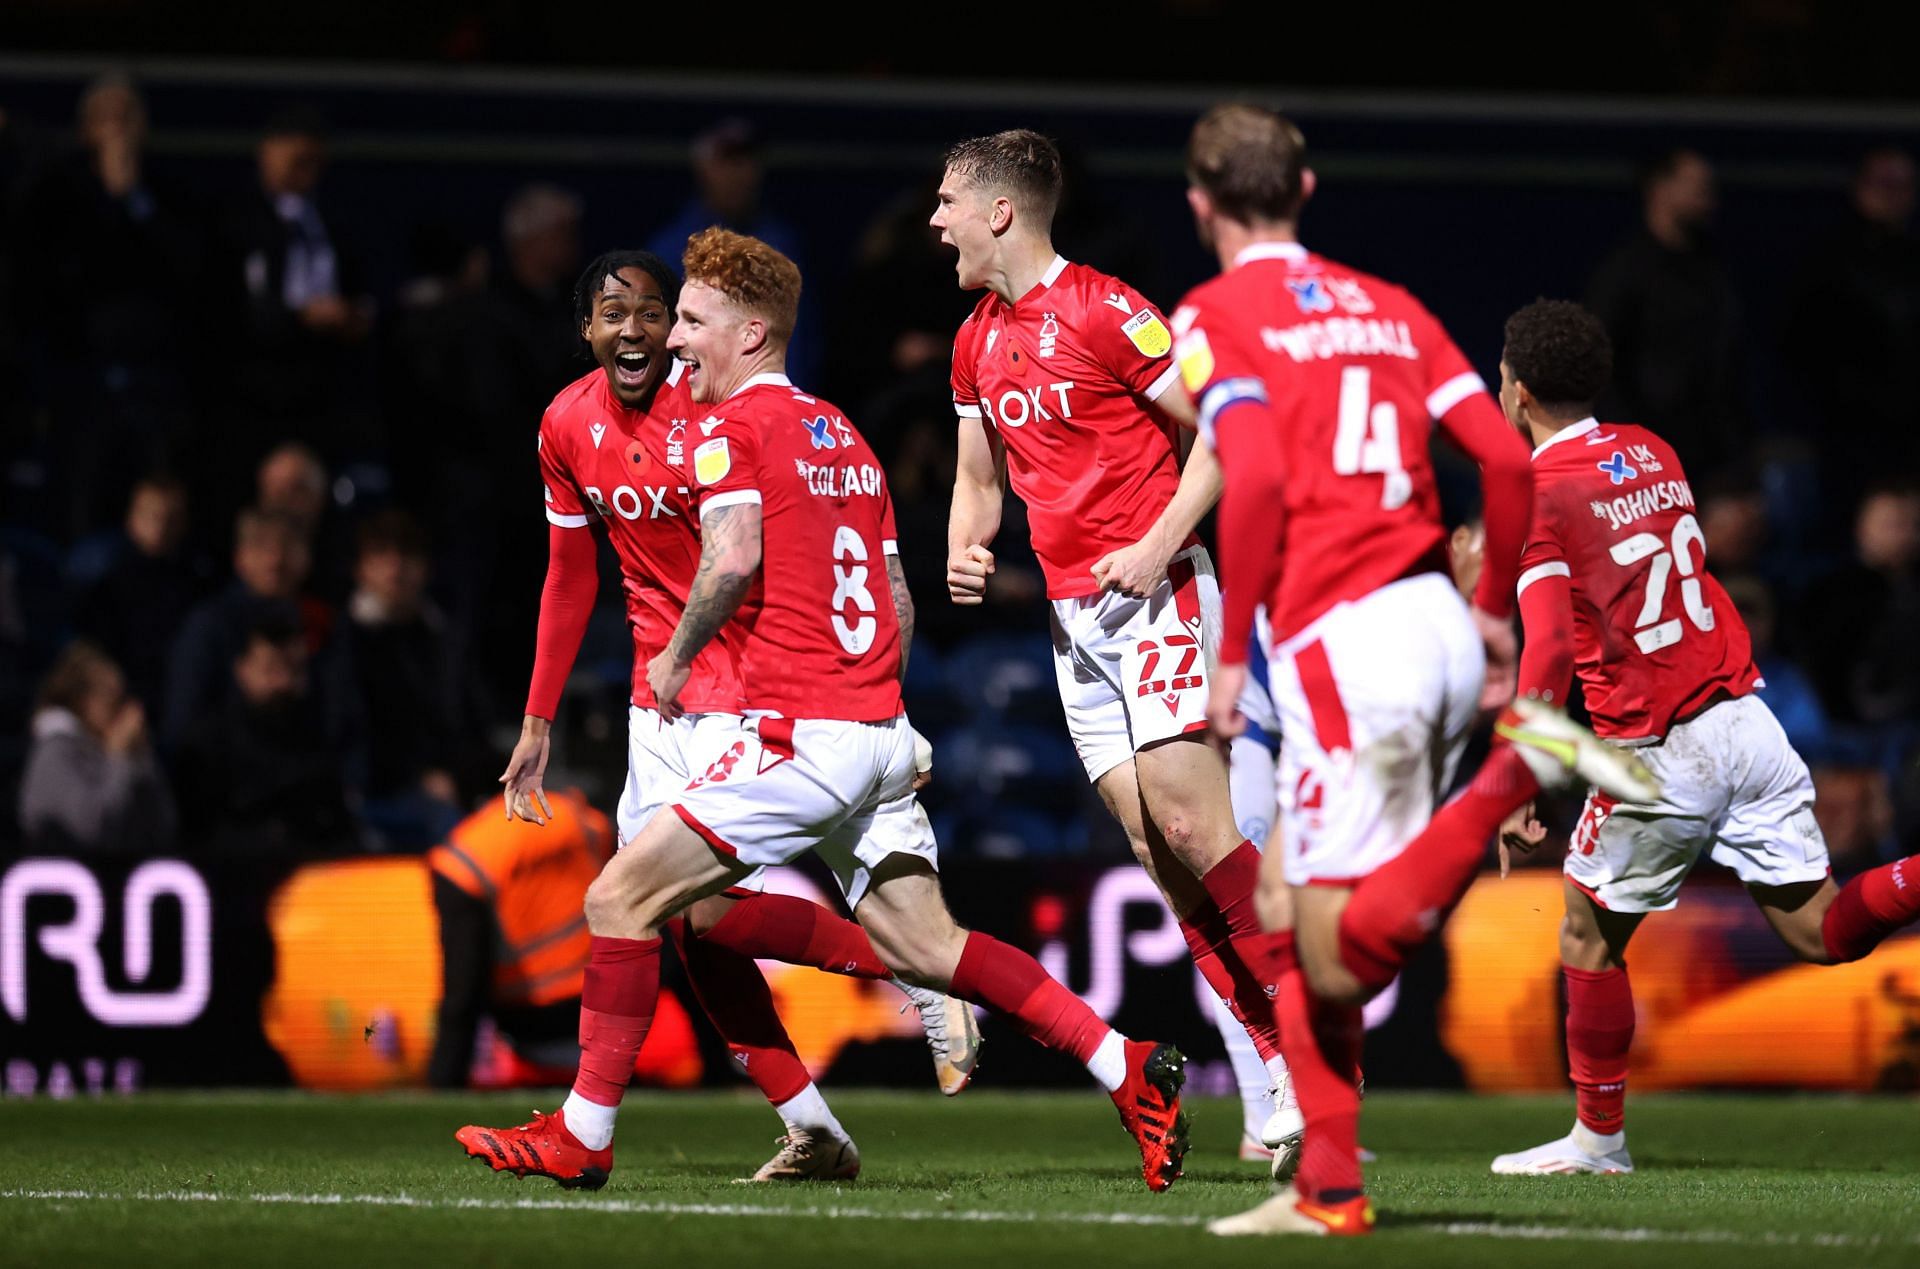 Nottingham Forest will host Sheffield United on Tuesday - Sky Bet Championship